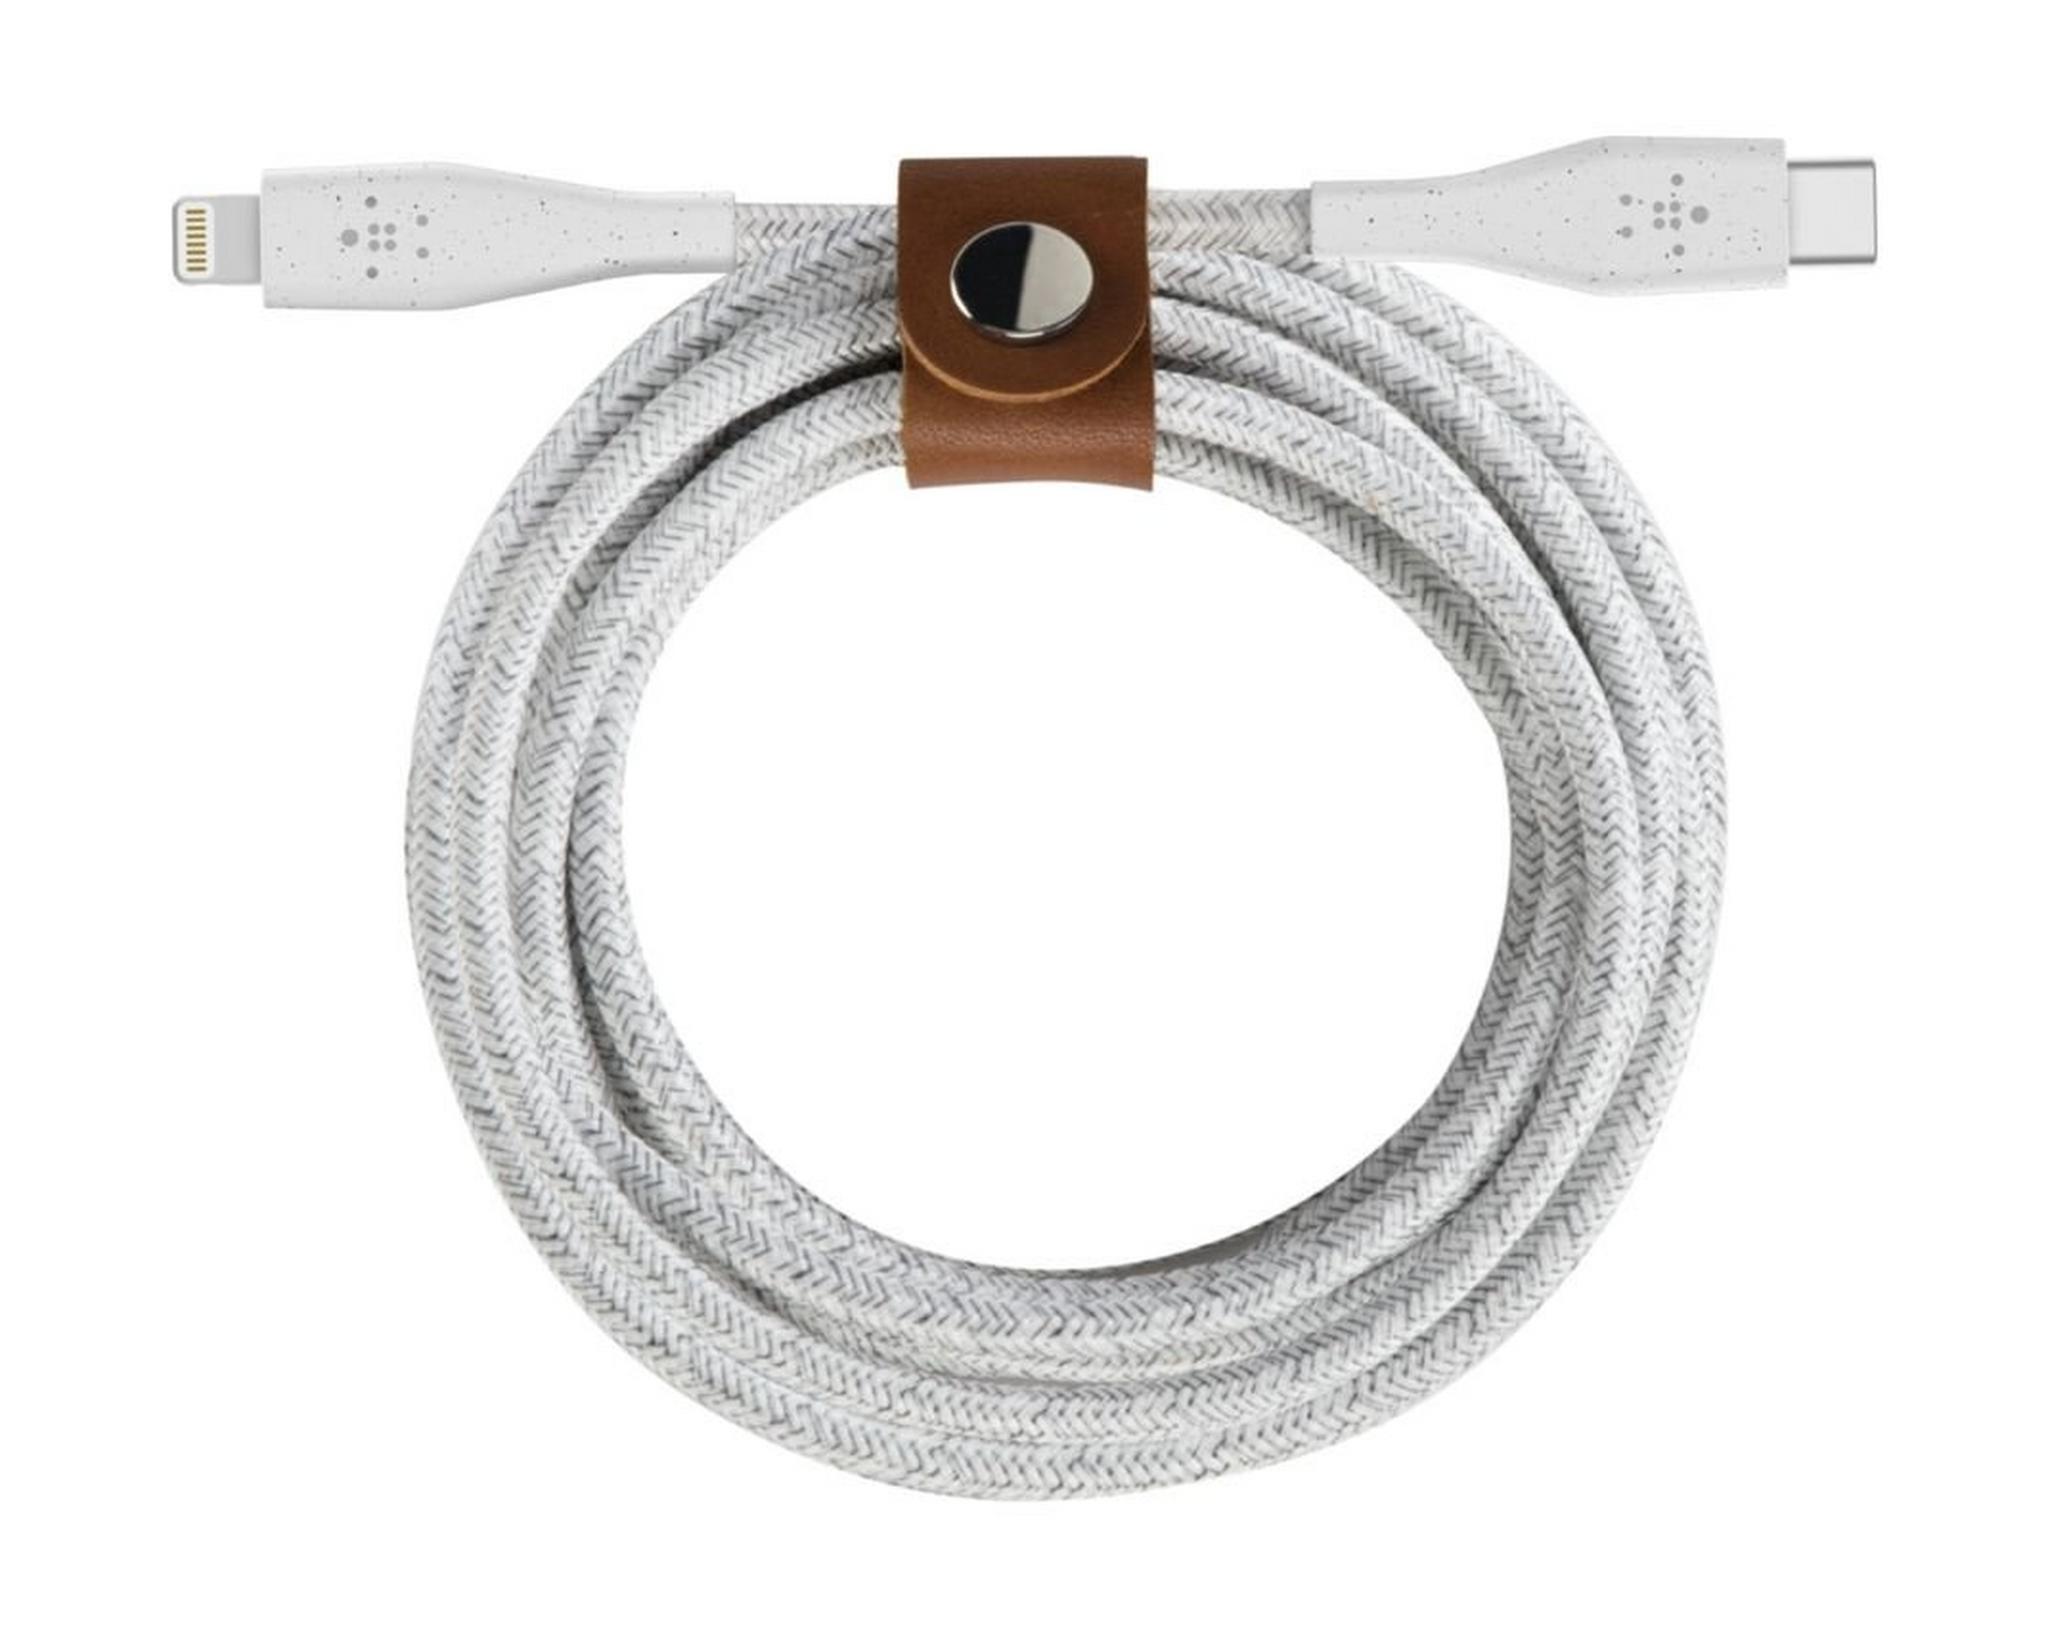 Belkin Boost Charge  USB-C Cable with Lightning Connector 1.2M